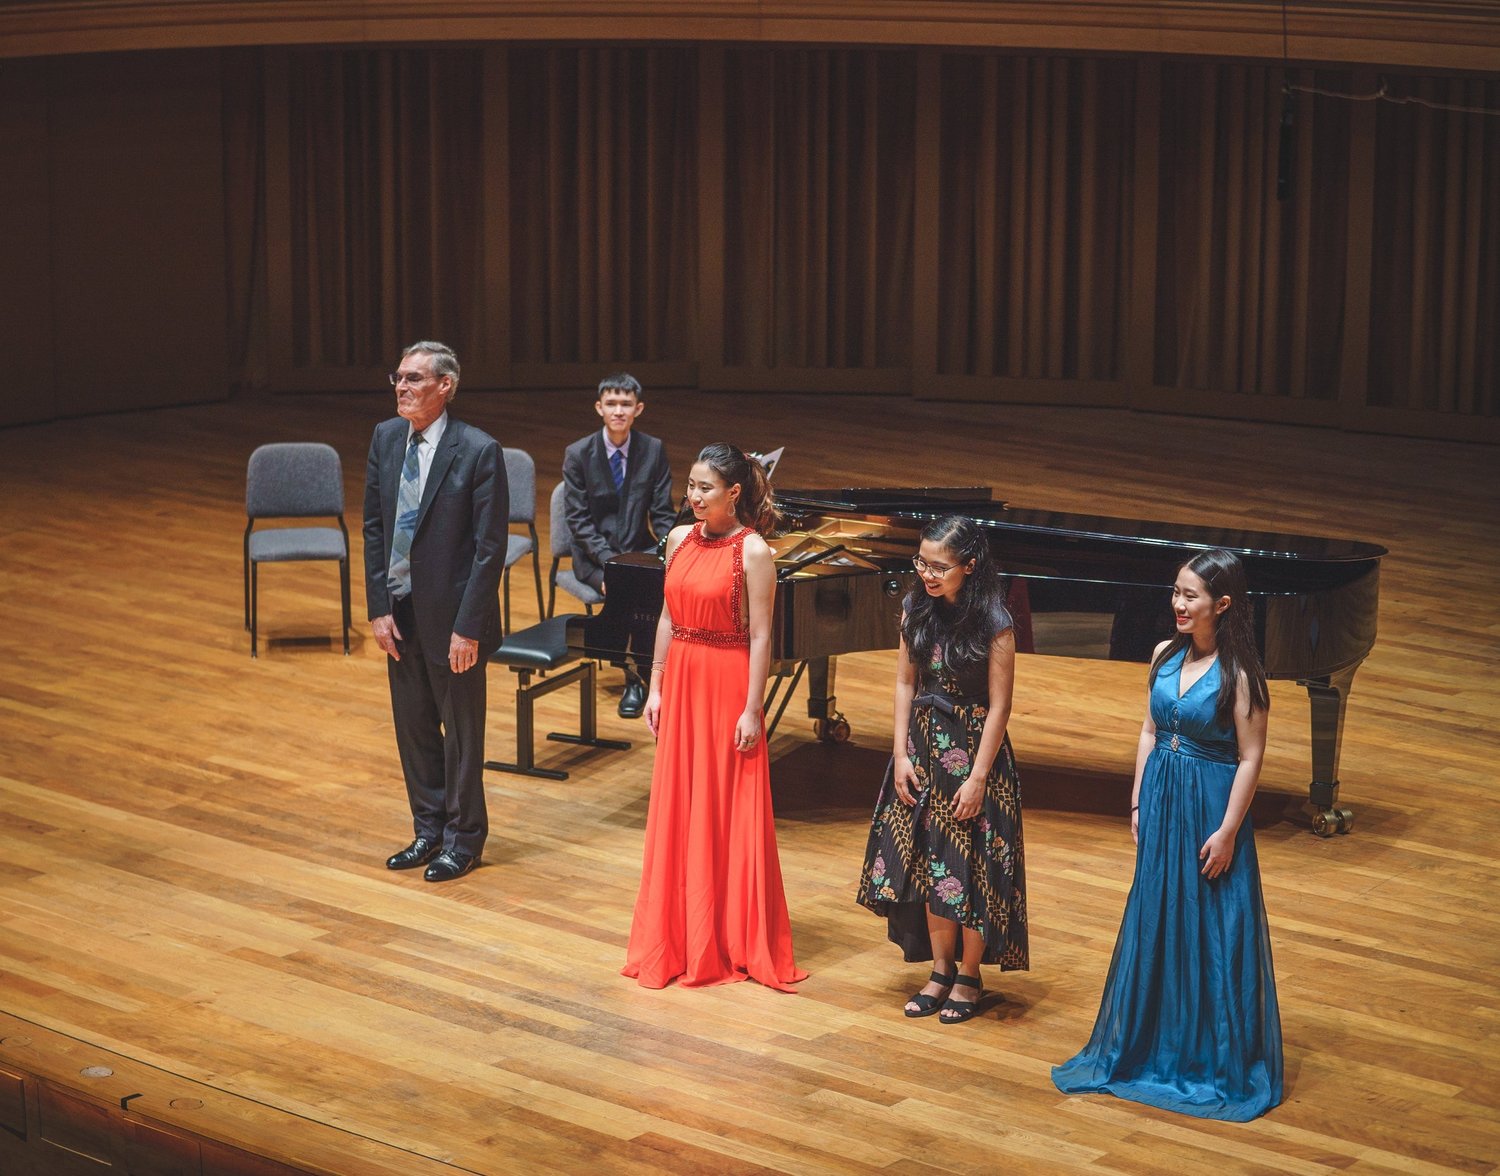 Maggie in performance with Ong Teng Cheong Professors of Music, Masaaki Suzuki and Roger Vignoles.